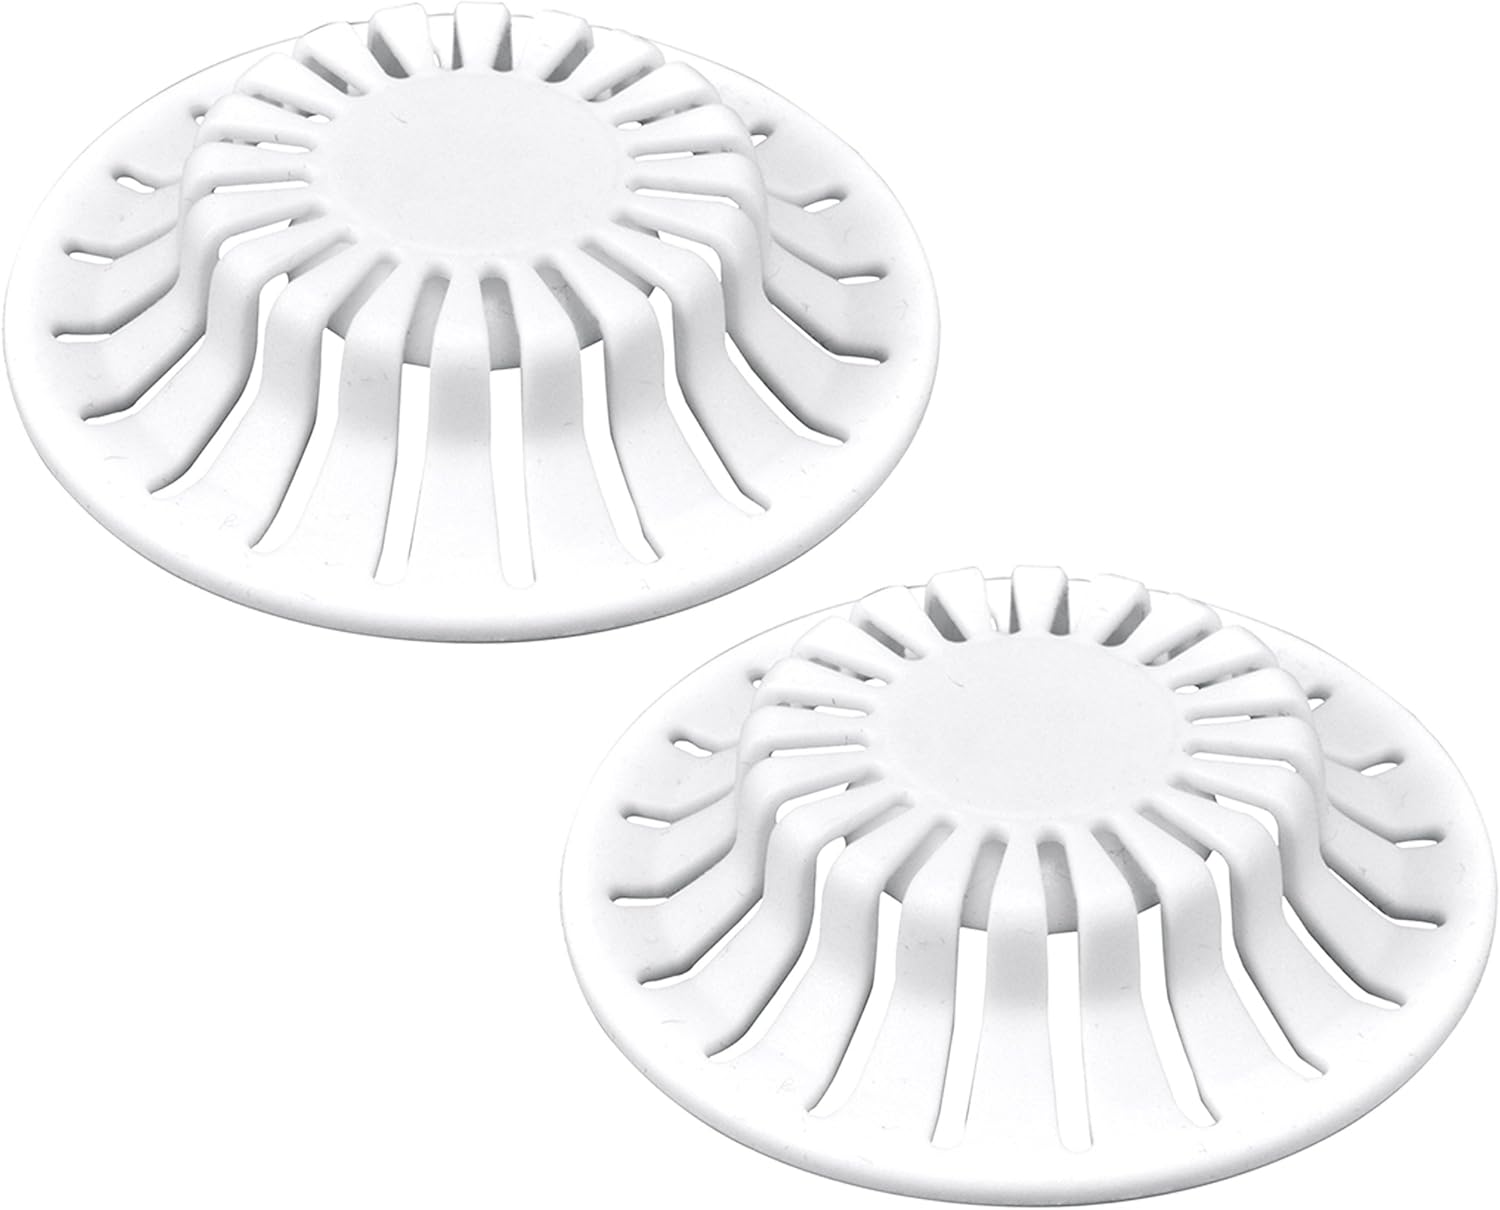 Danby DANCO Universal Bathroom Sink Suction Cup Hair Catcher Strainer and Snare | For Pop-Up Stoppers | White | 2 Pack (10769)